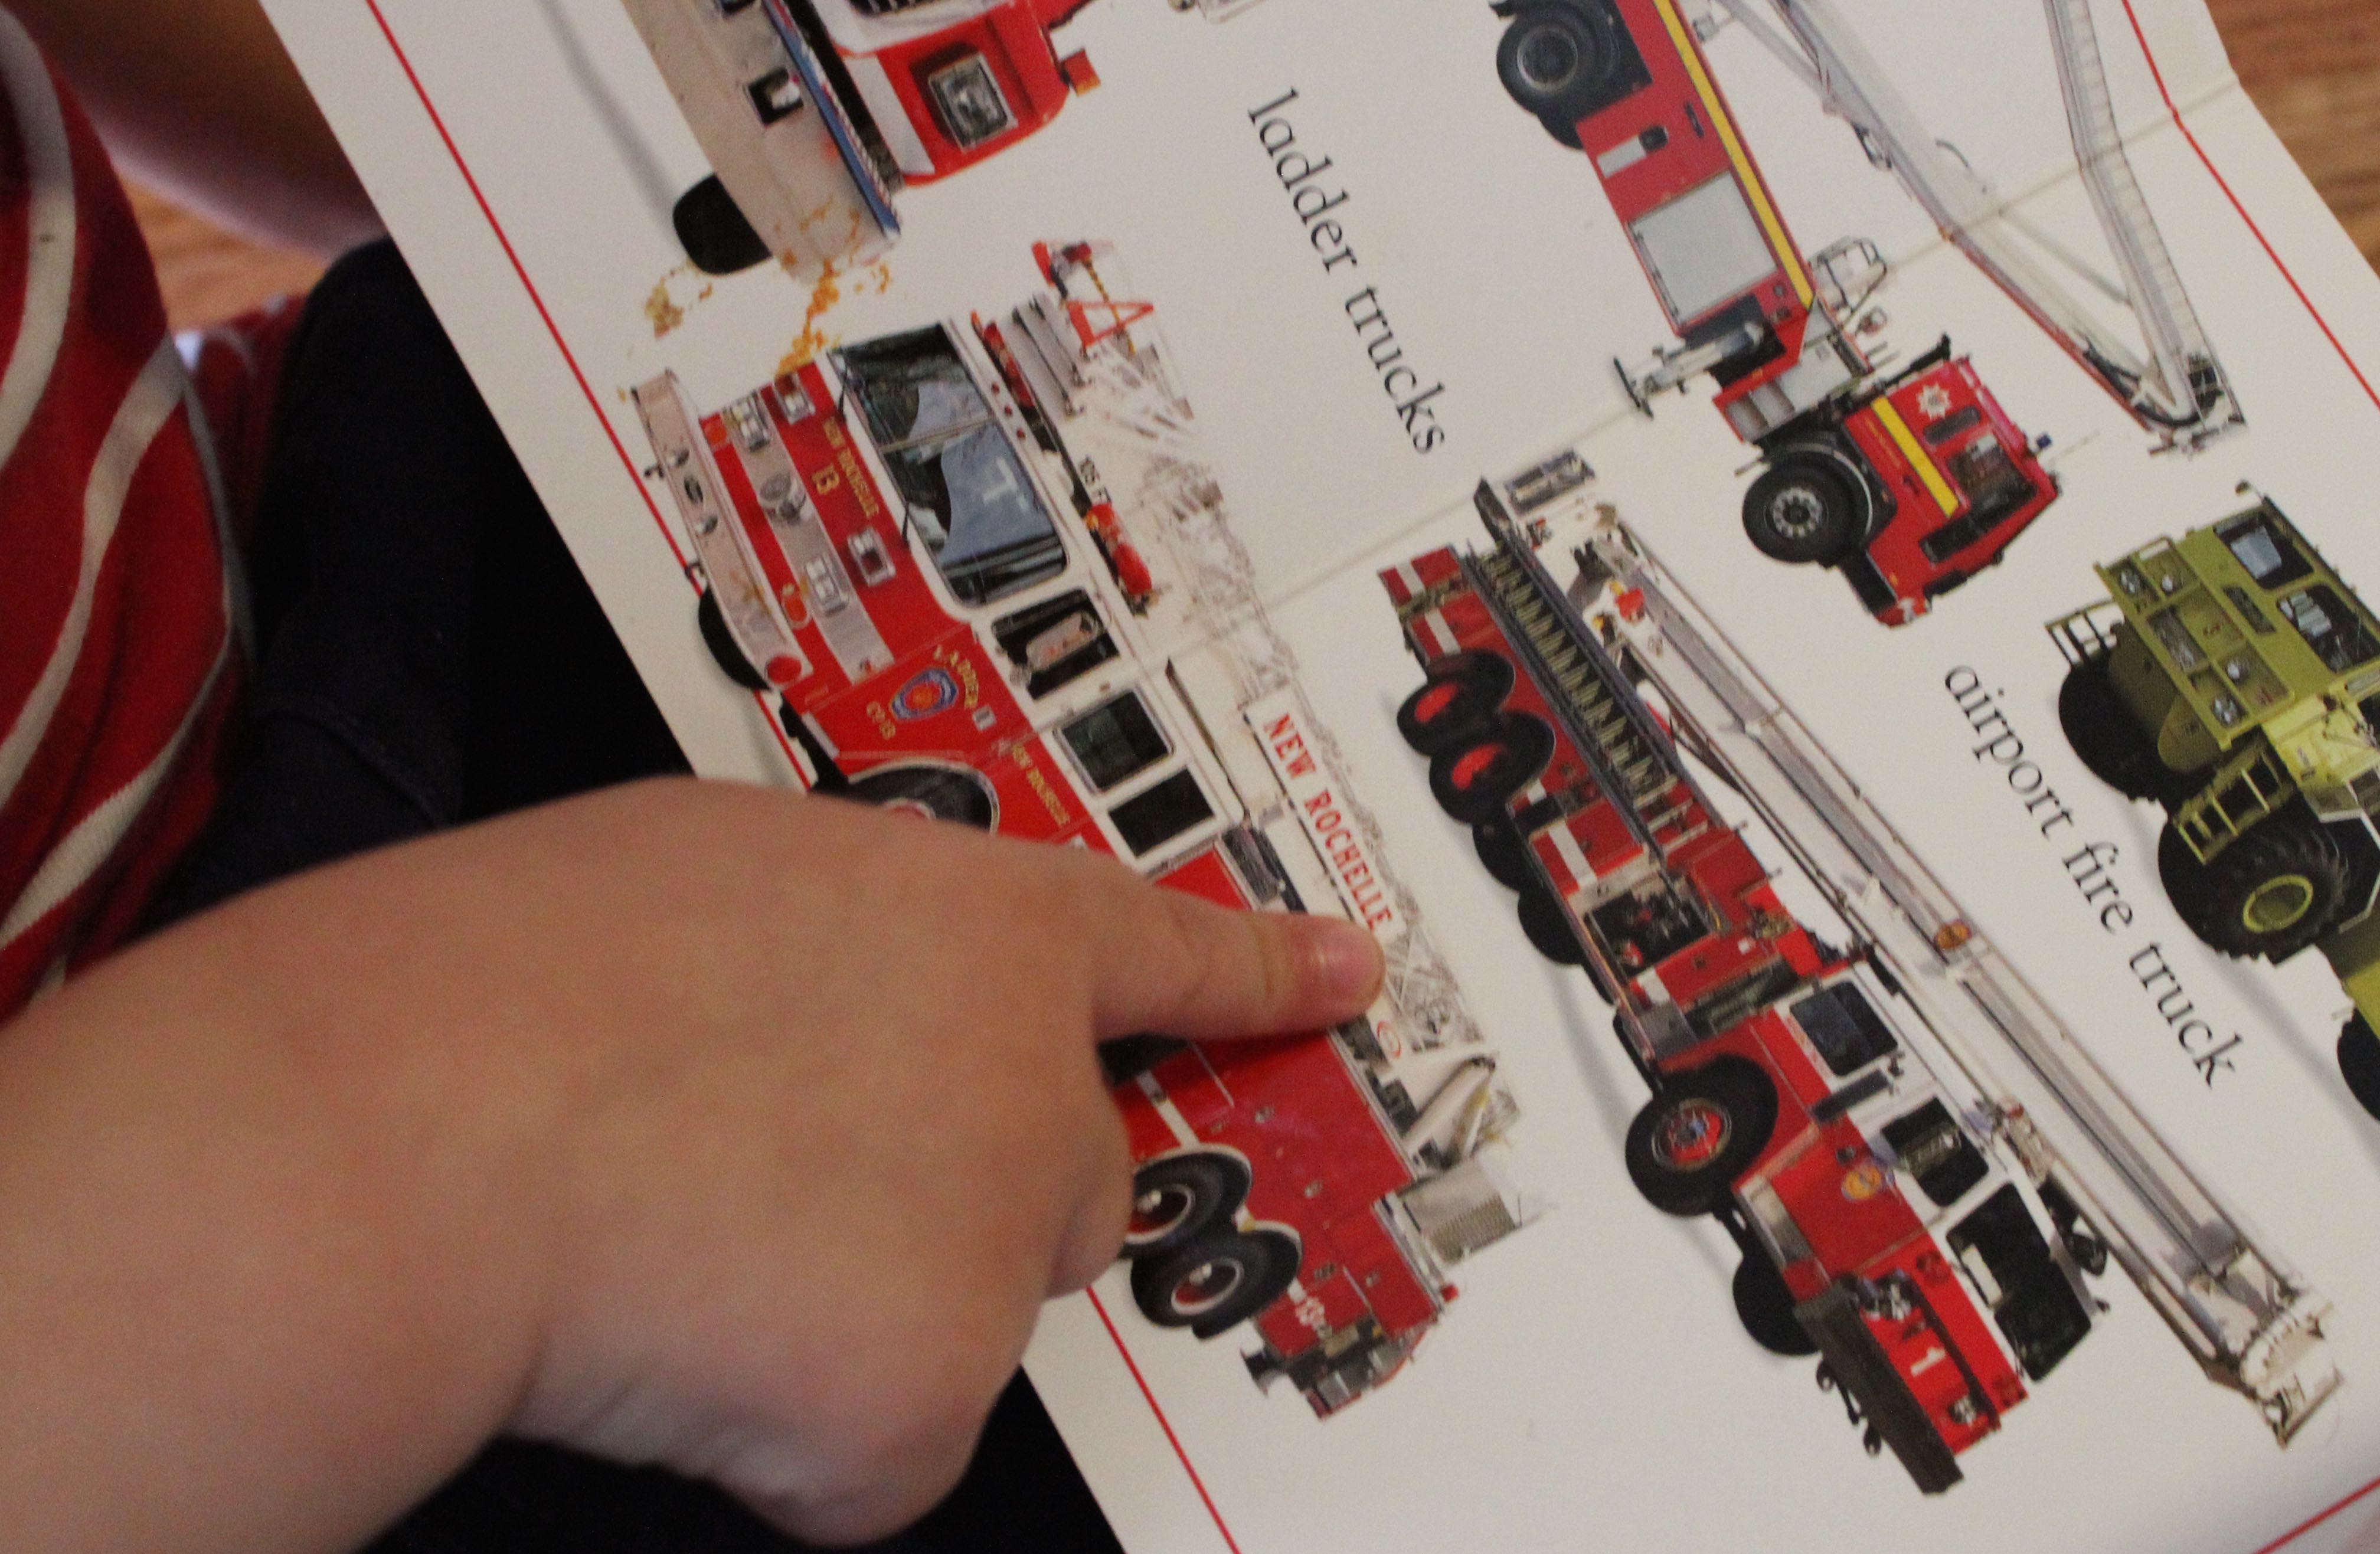 Luke points to or 'tacts' all the fire trucks on the page.